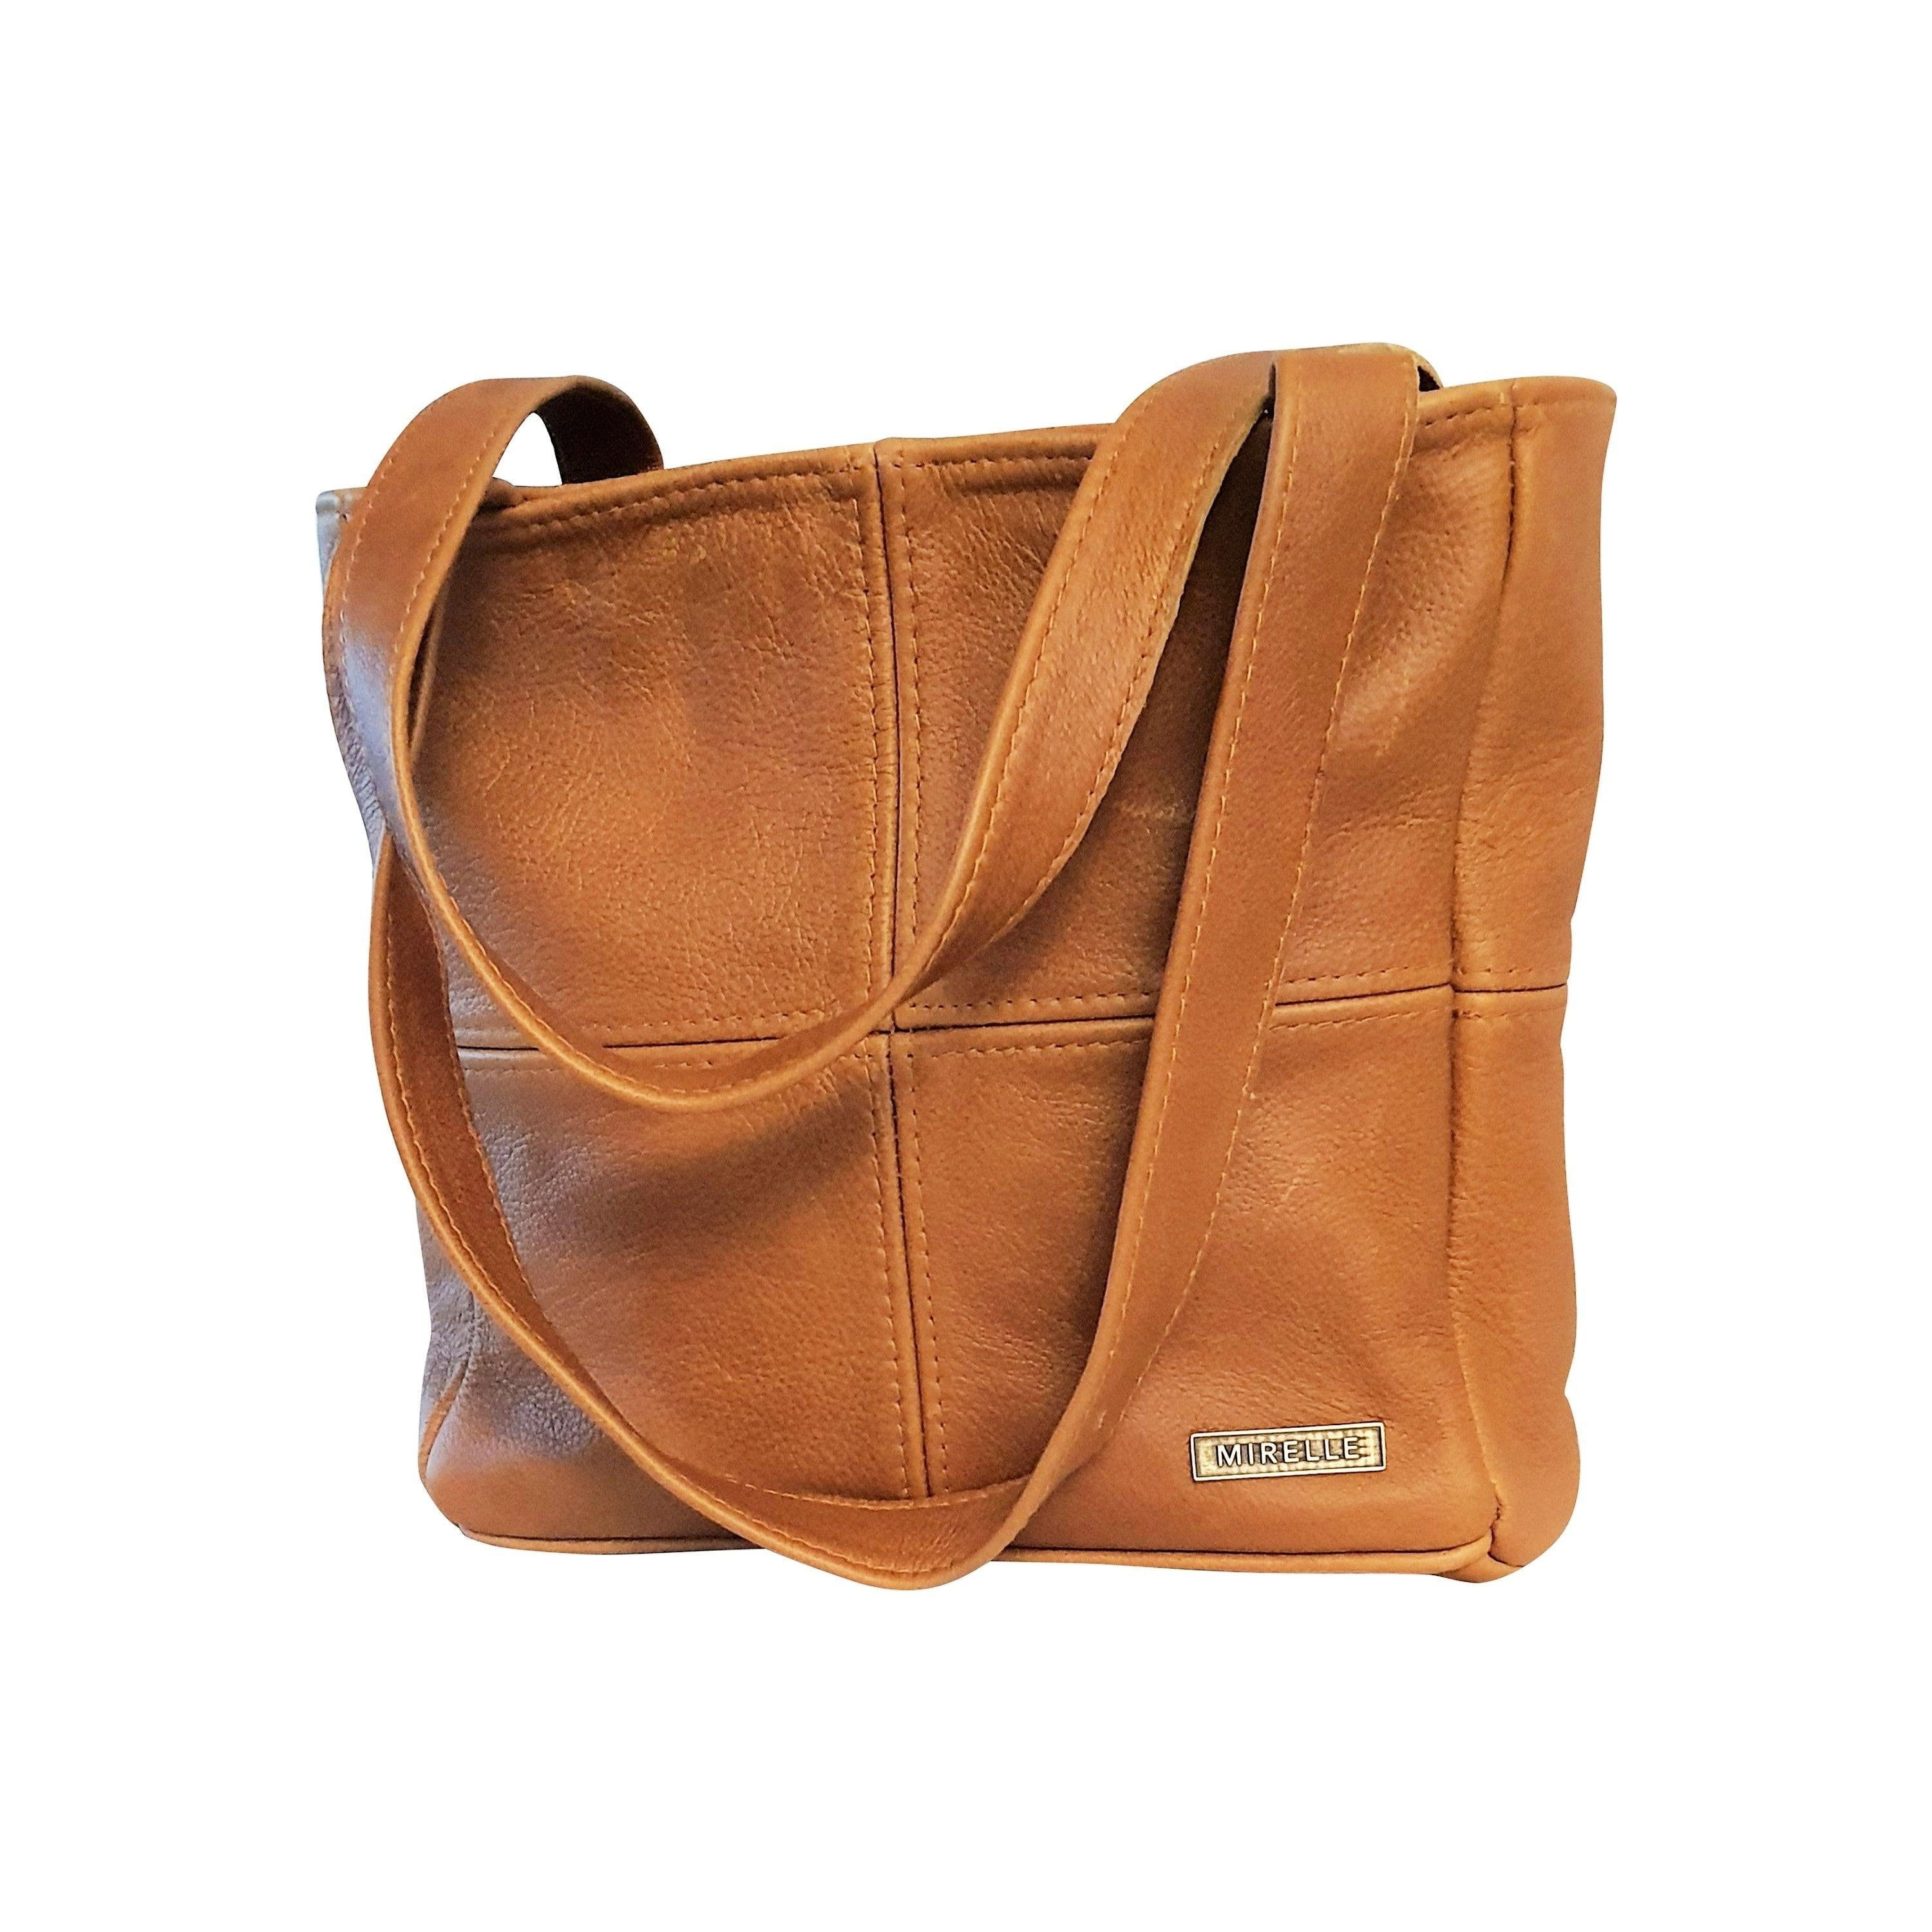 Mirelle Leather Classic Shopper Handbag - Small - Mirelle Leather and Lifestyle